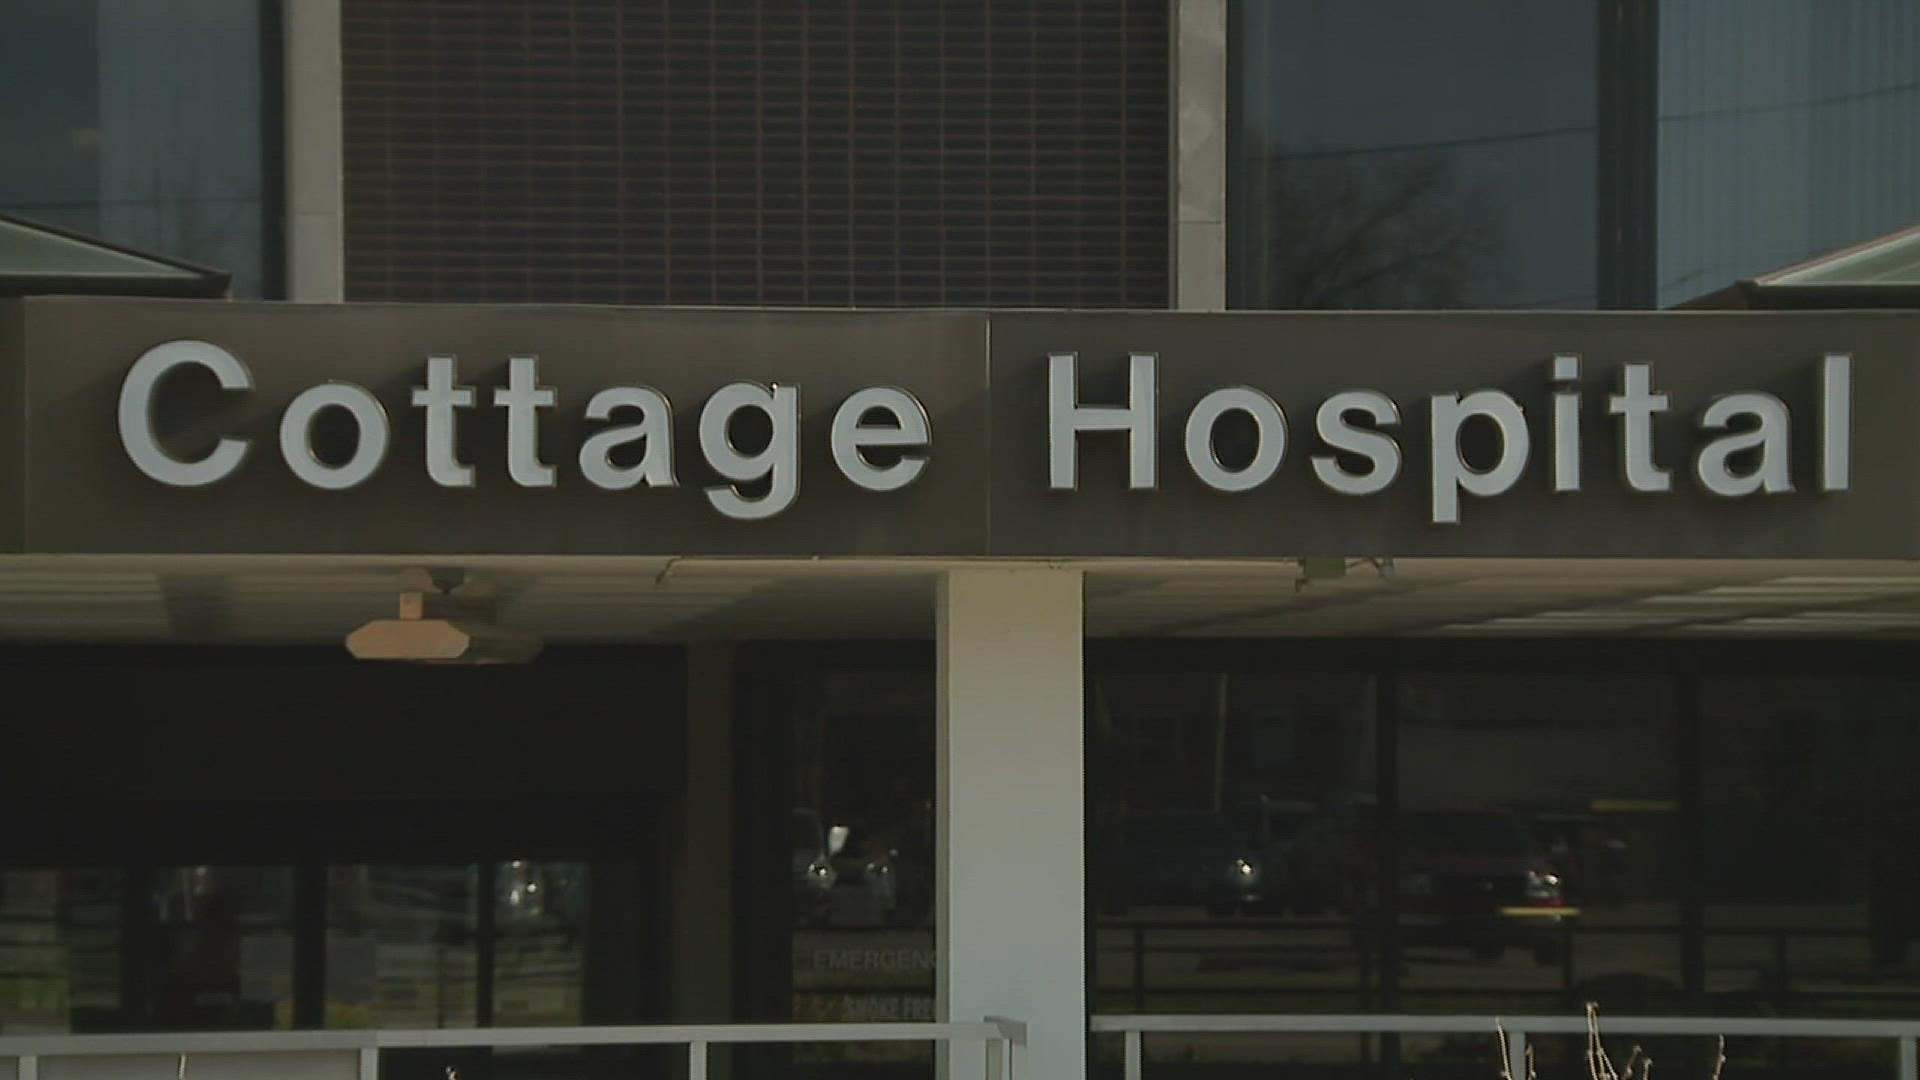 According to a termination notice from the Dept. of Health & Human Services, Cottage is not in compliance with several Medicare and Medicaid conditions.